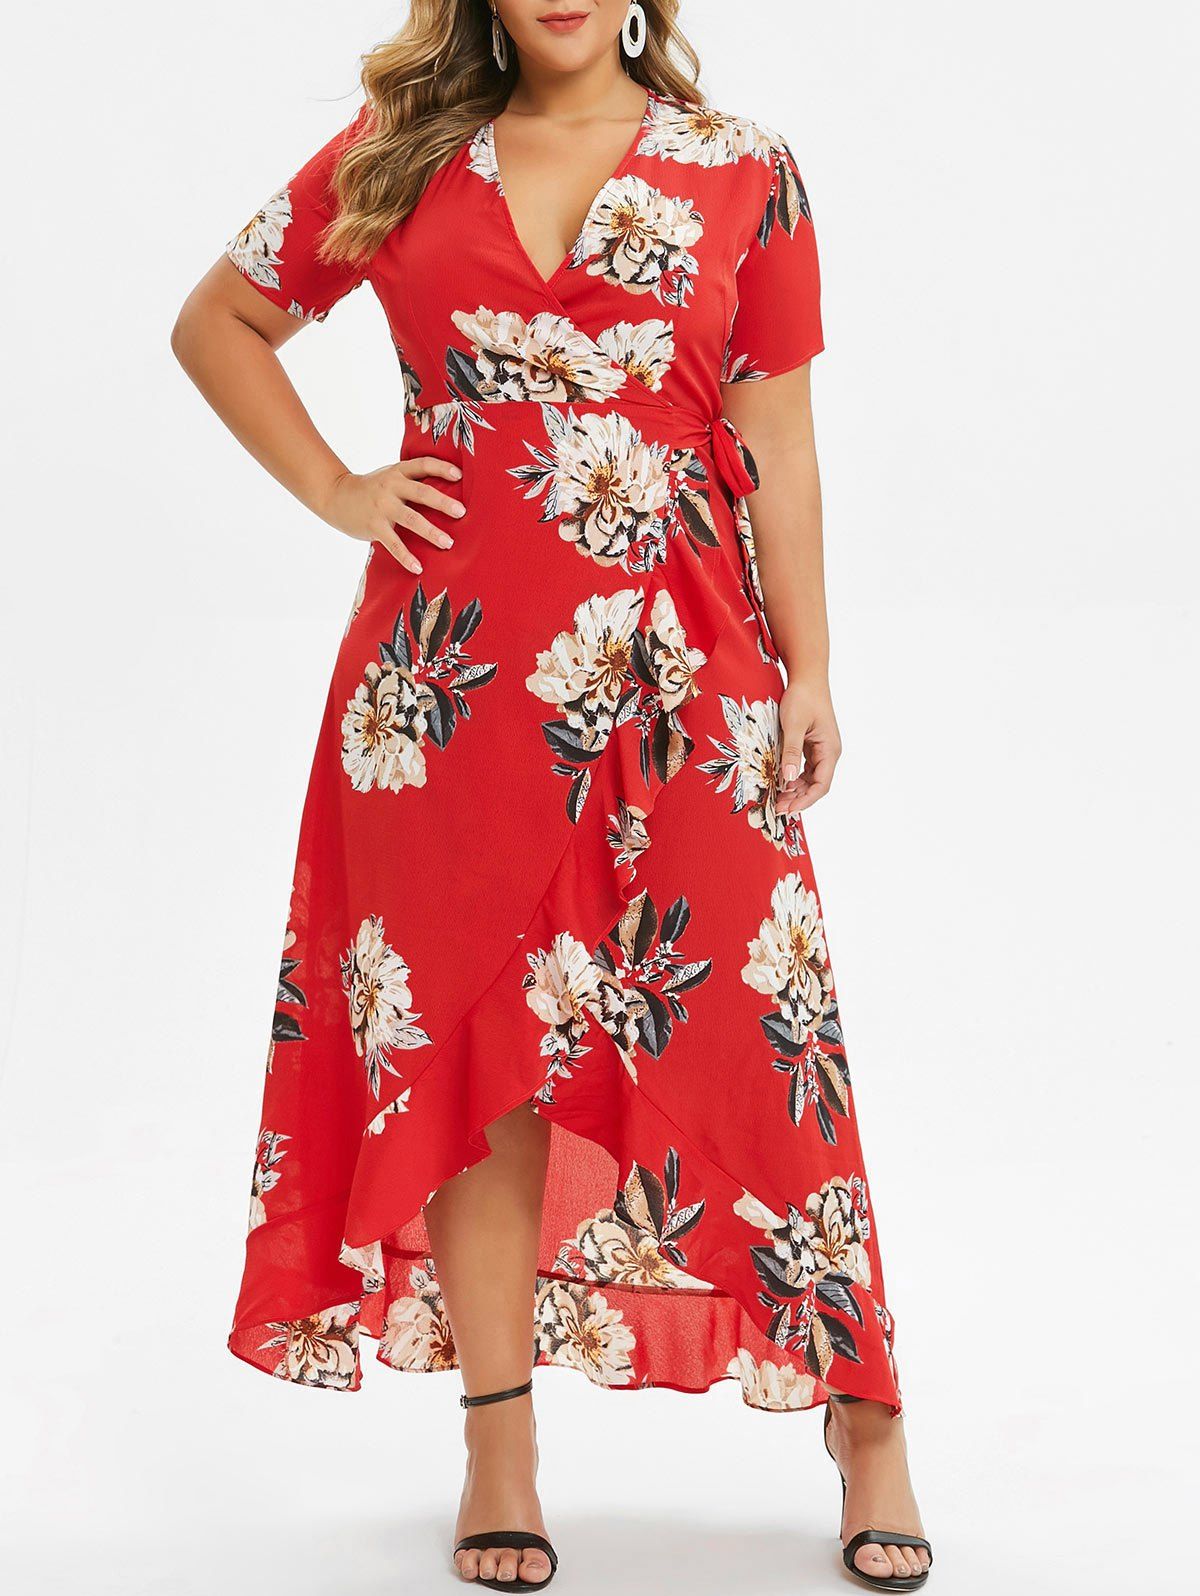 Plus Size Red Floral Dress Hot Sale, UP ...